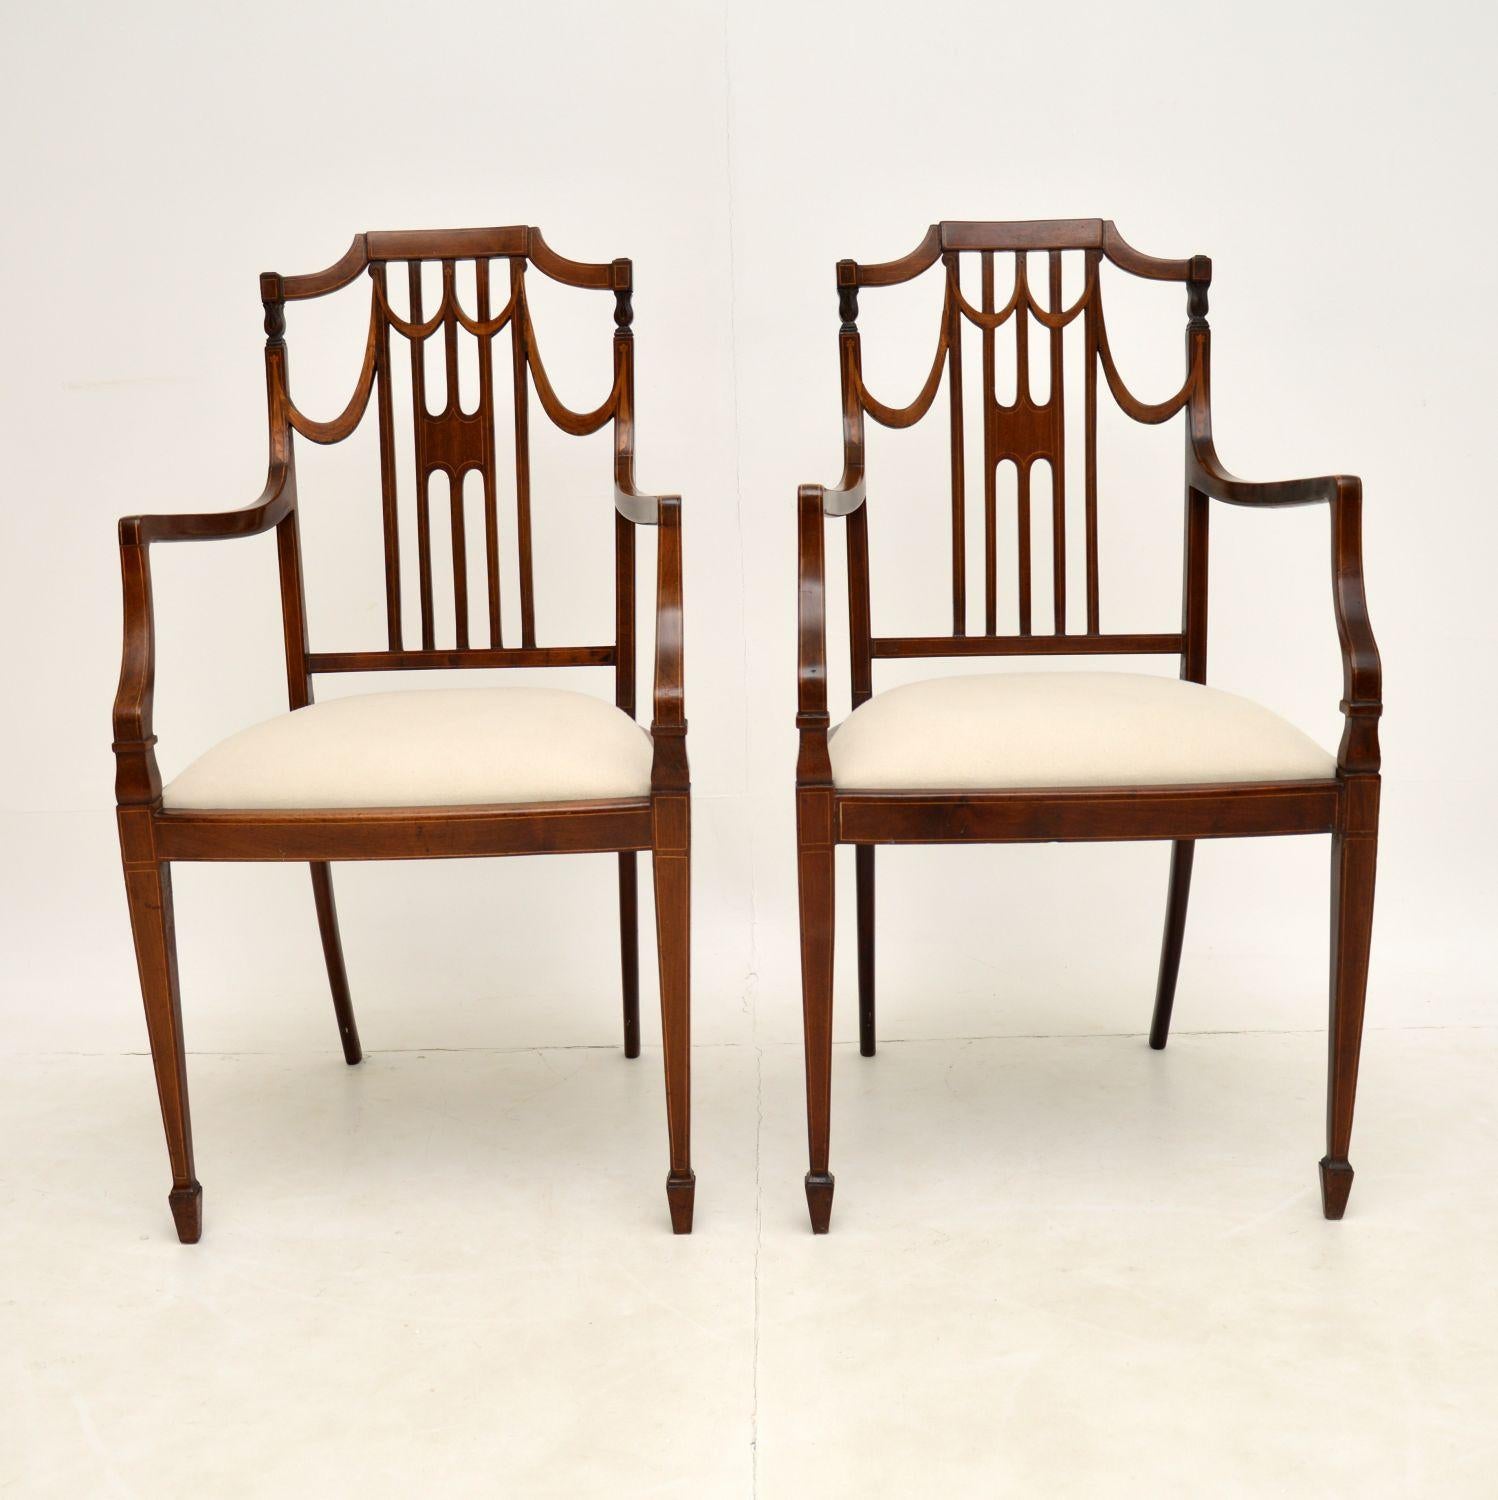 A stunning pair of antique Edwardian period armchairs in mahogany. These were made in England and date from the 1900-1910 period.

They have a very elegant design, with sweeping arms, a beautifully pierced back and tapered legs terminating in